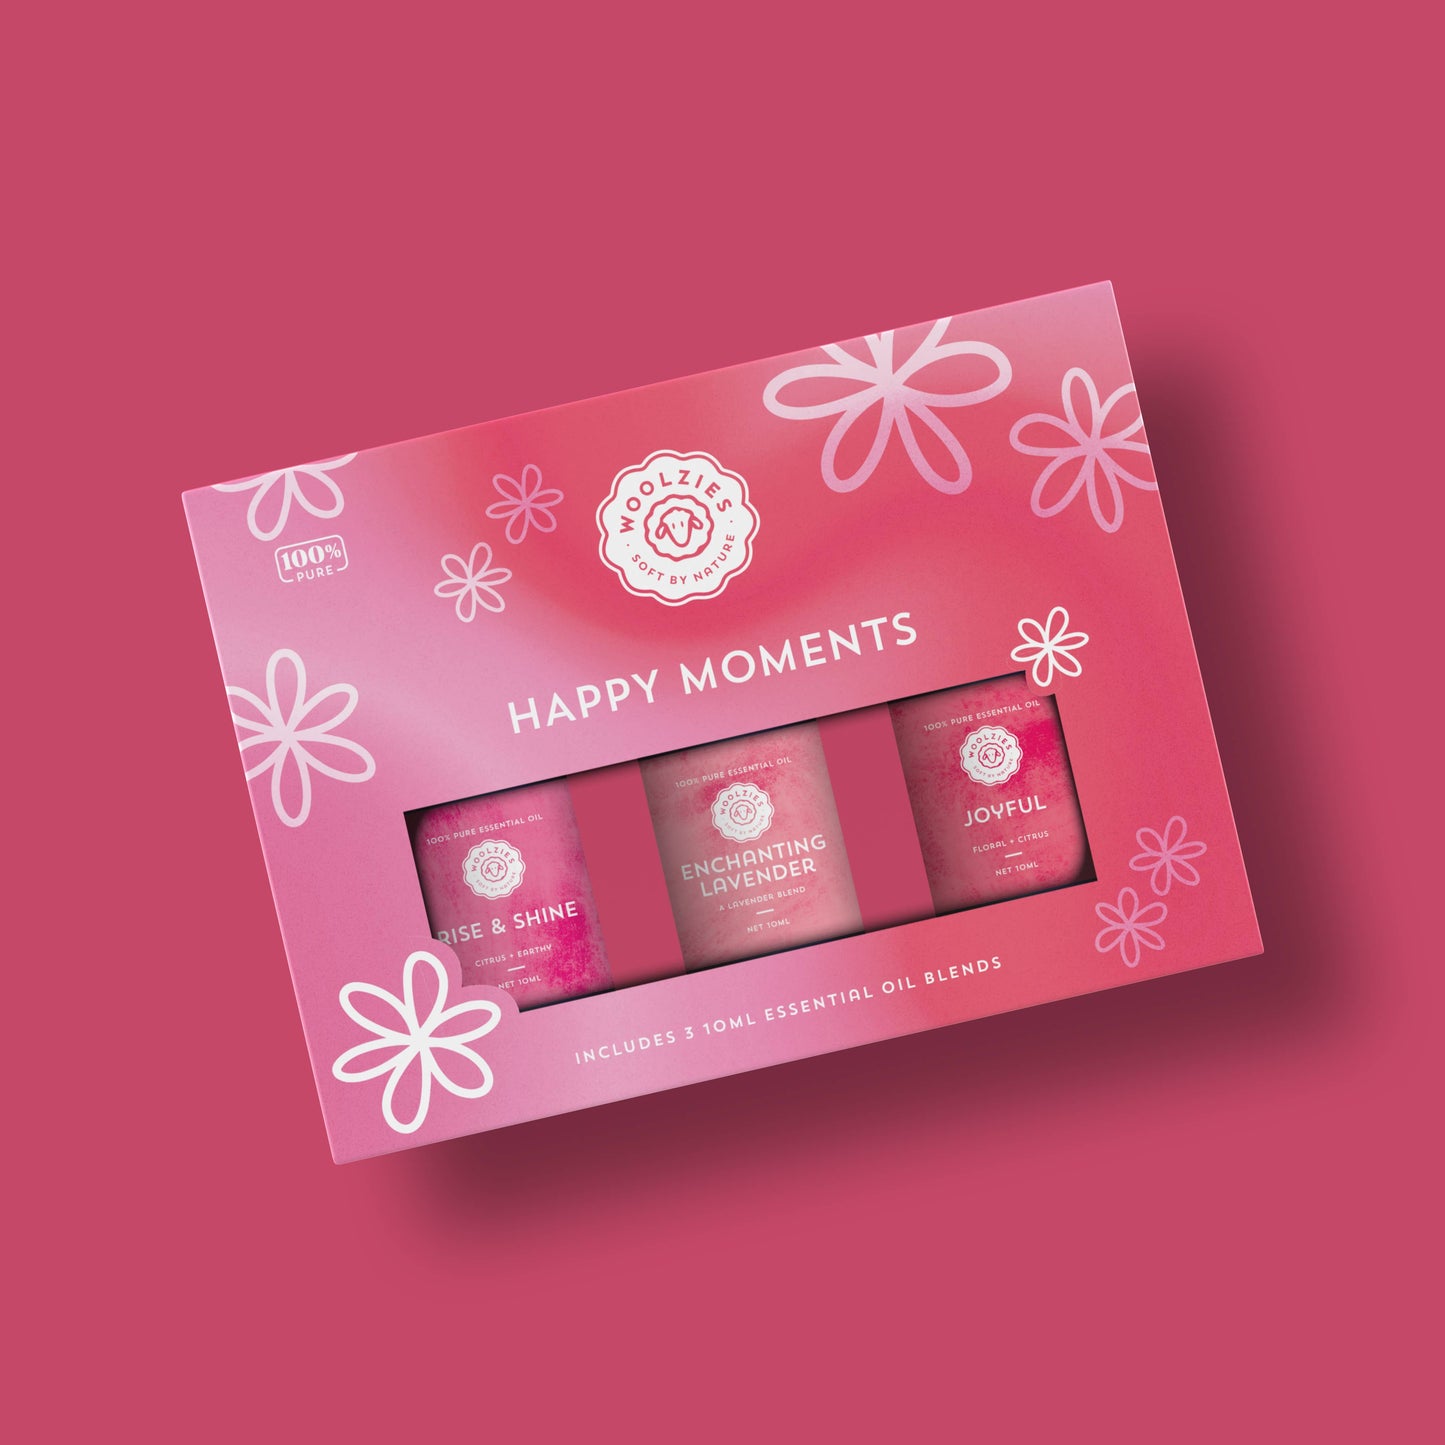 Happy Moments Collection Essential Oils